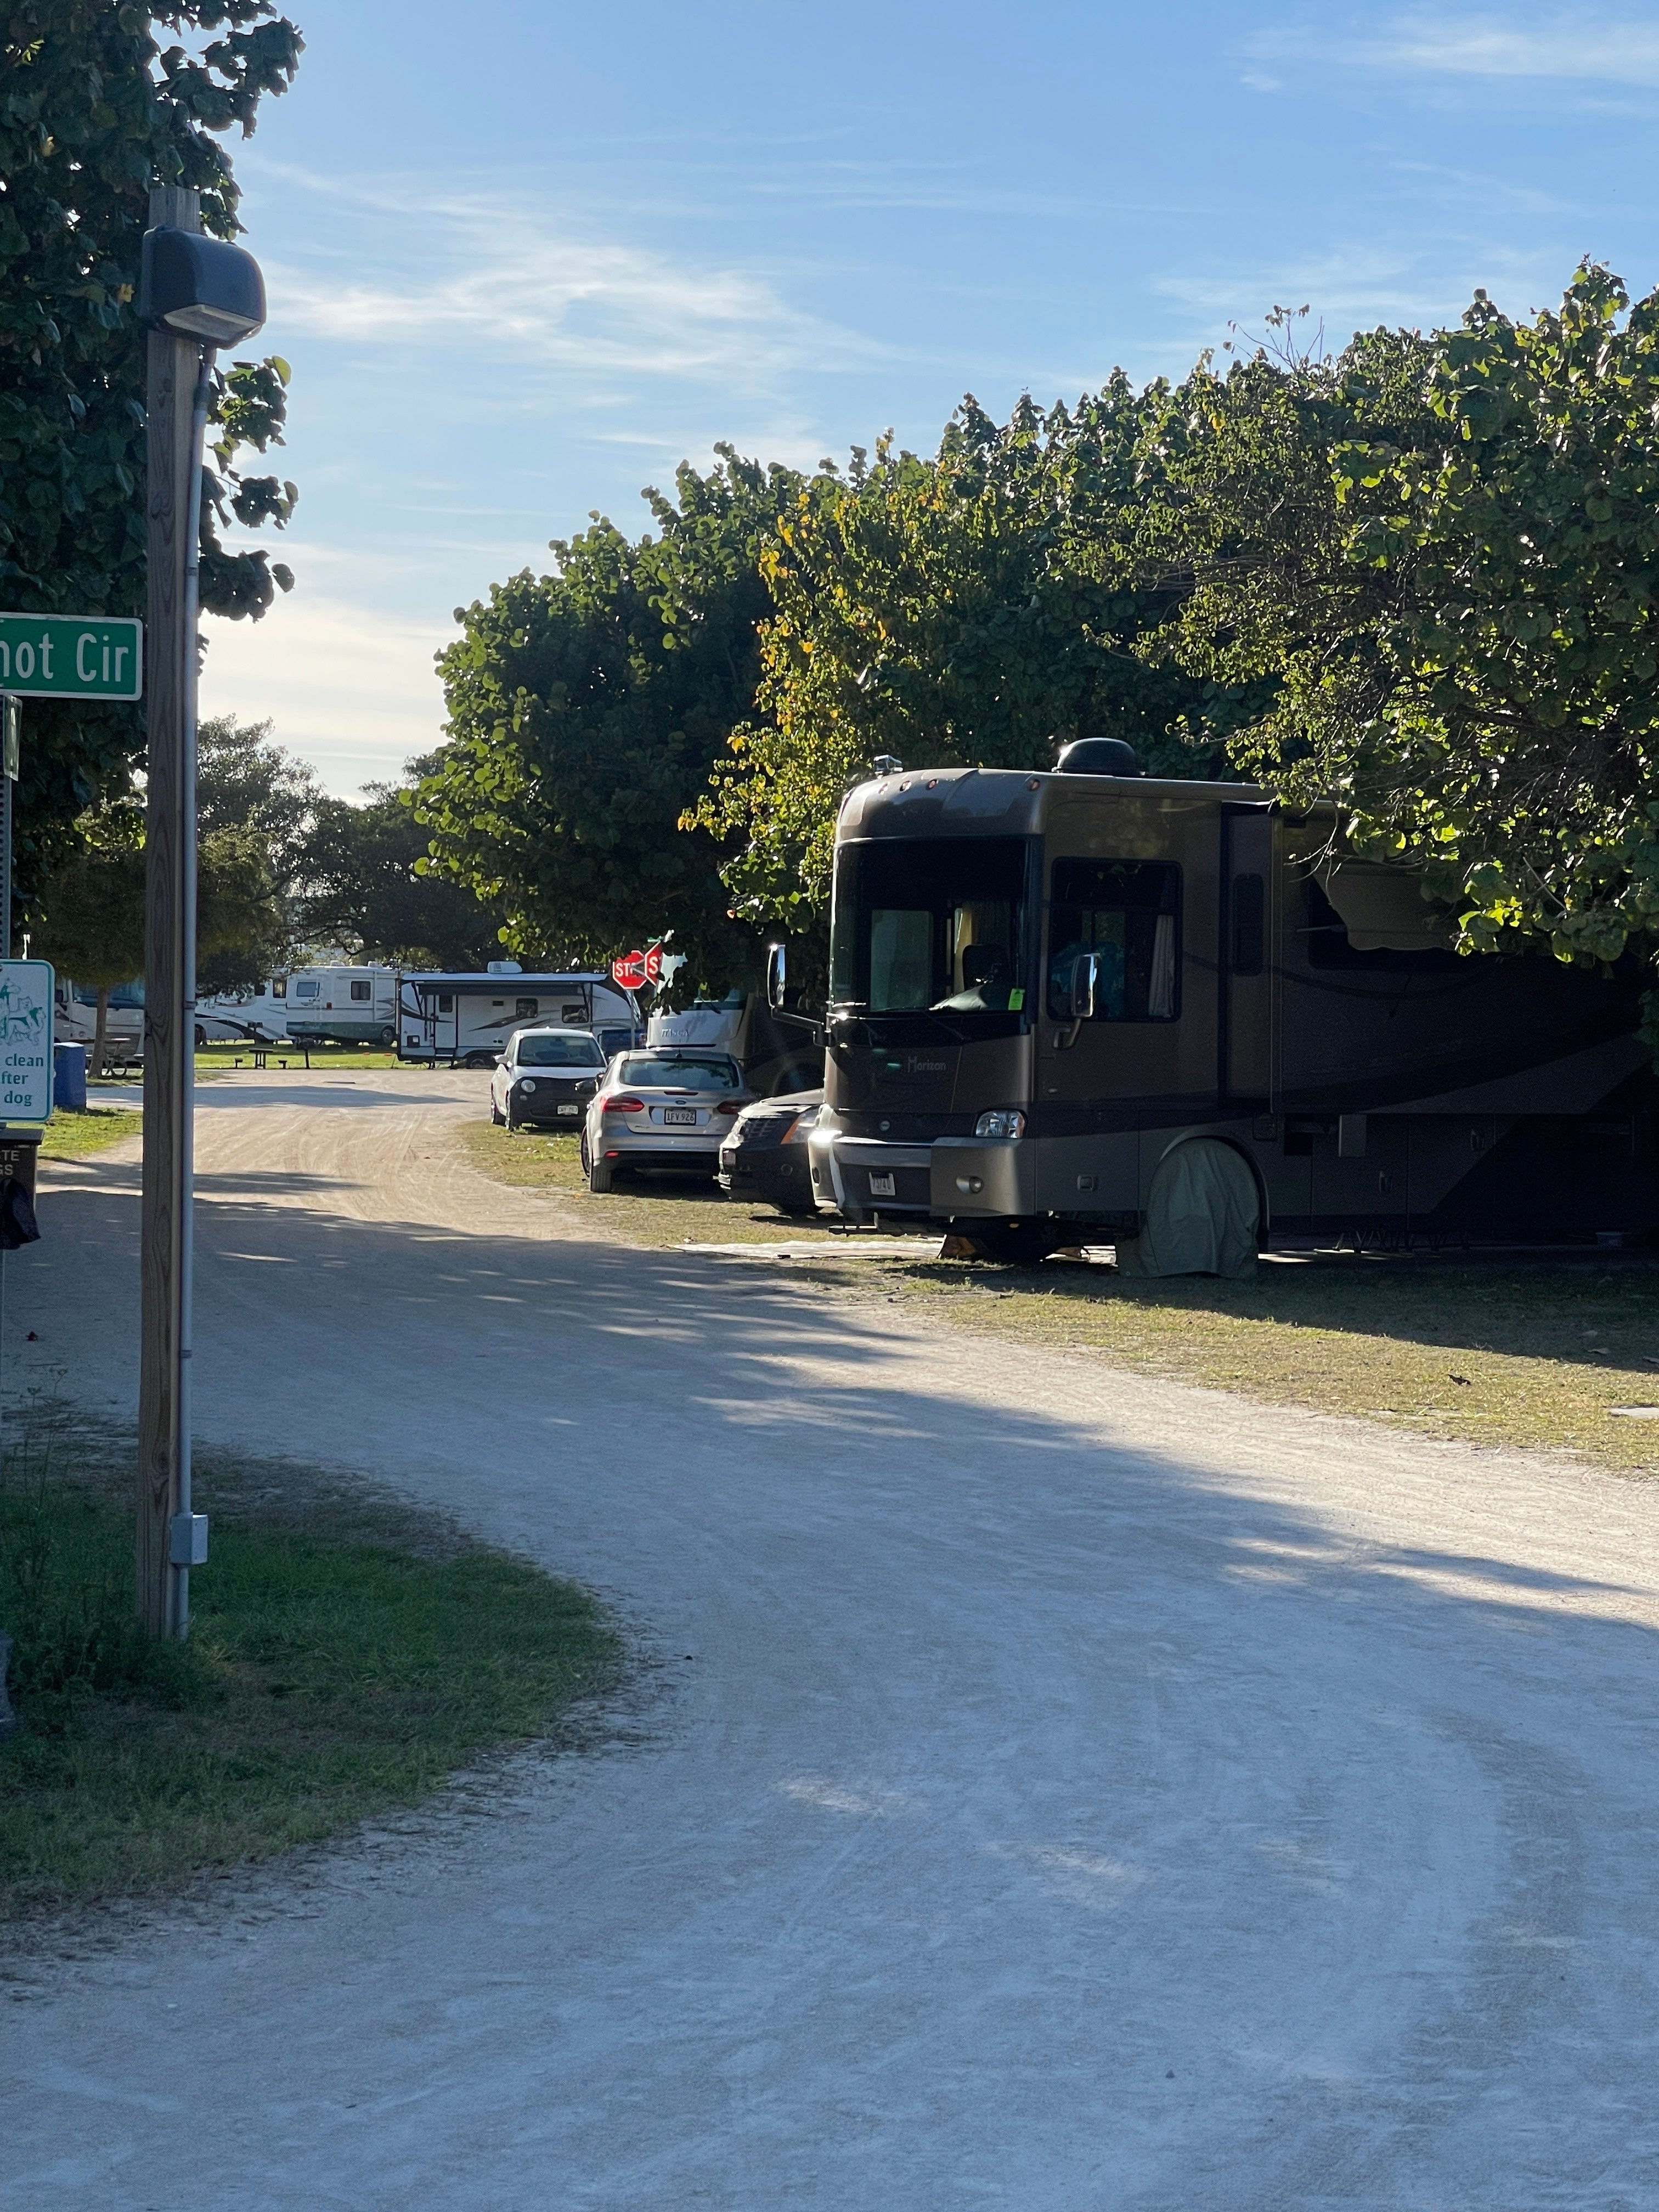 Camper submitted image from Jetty Park Canaveral Port Auth - 3